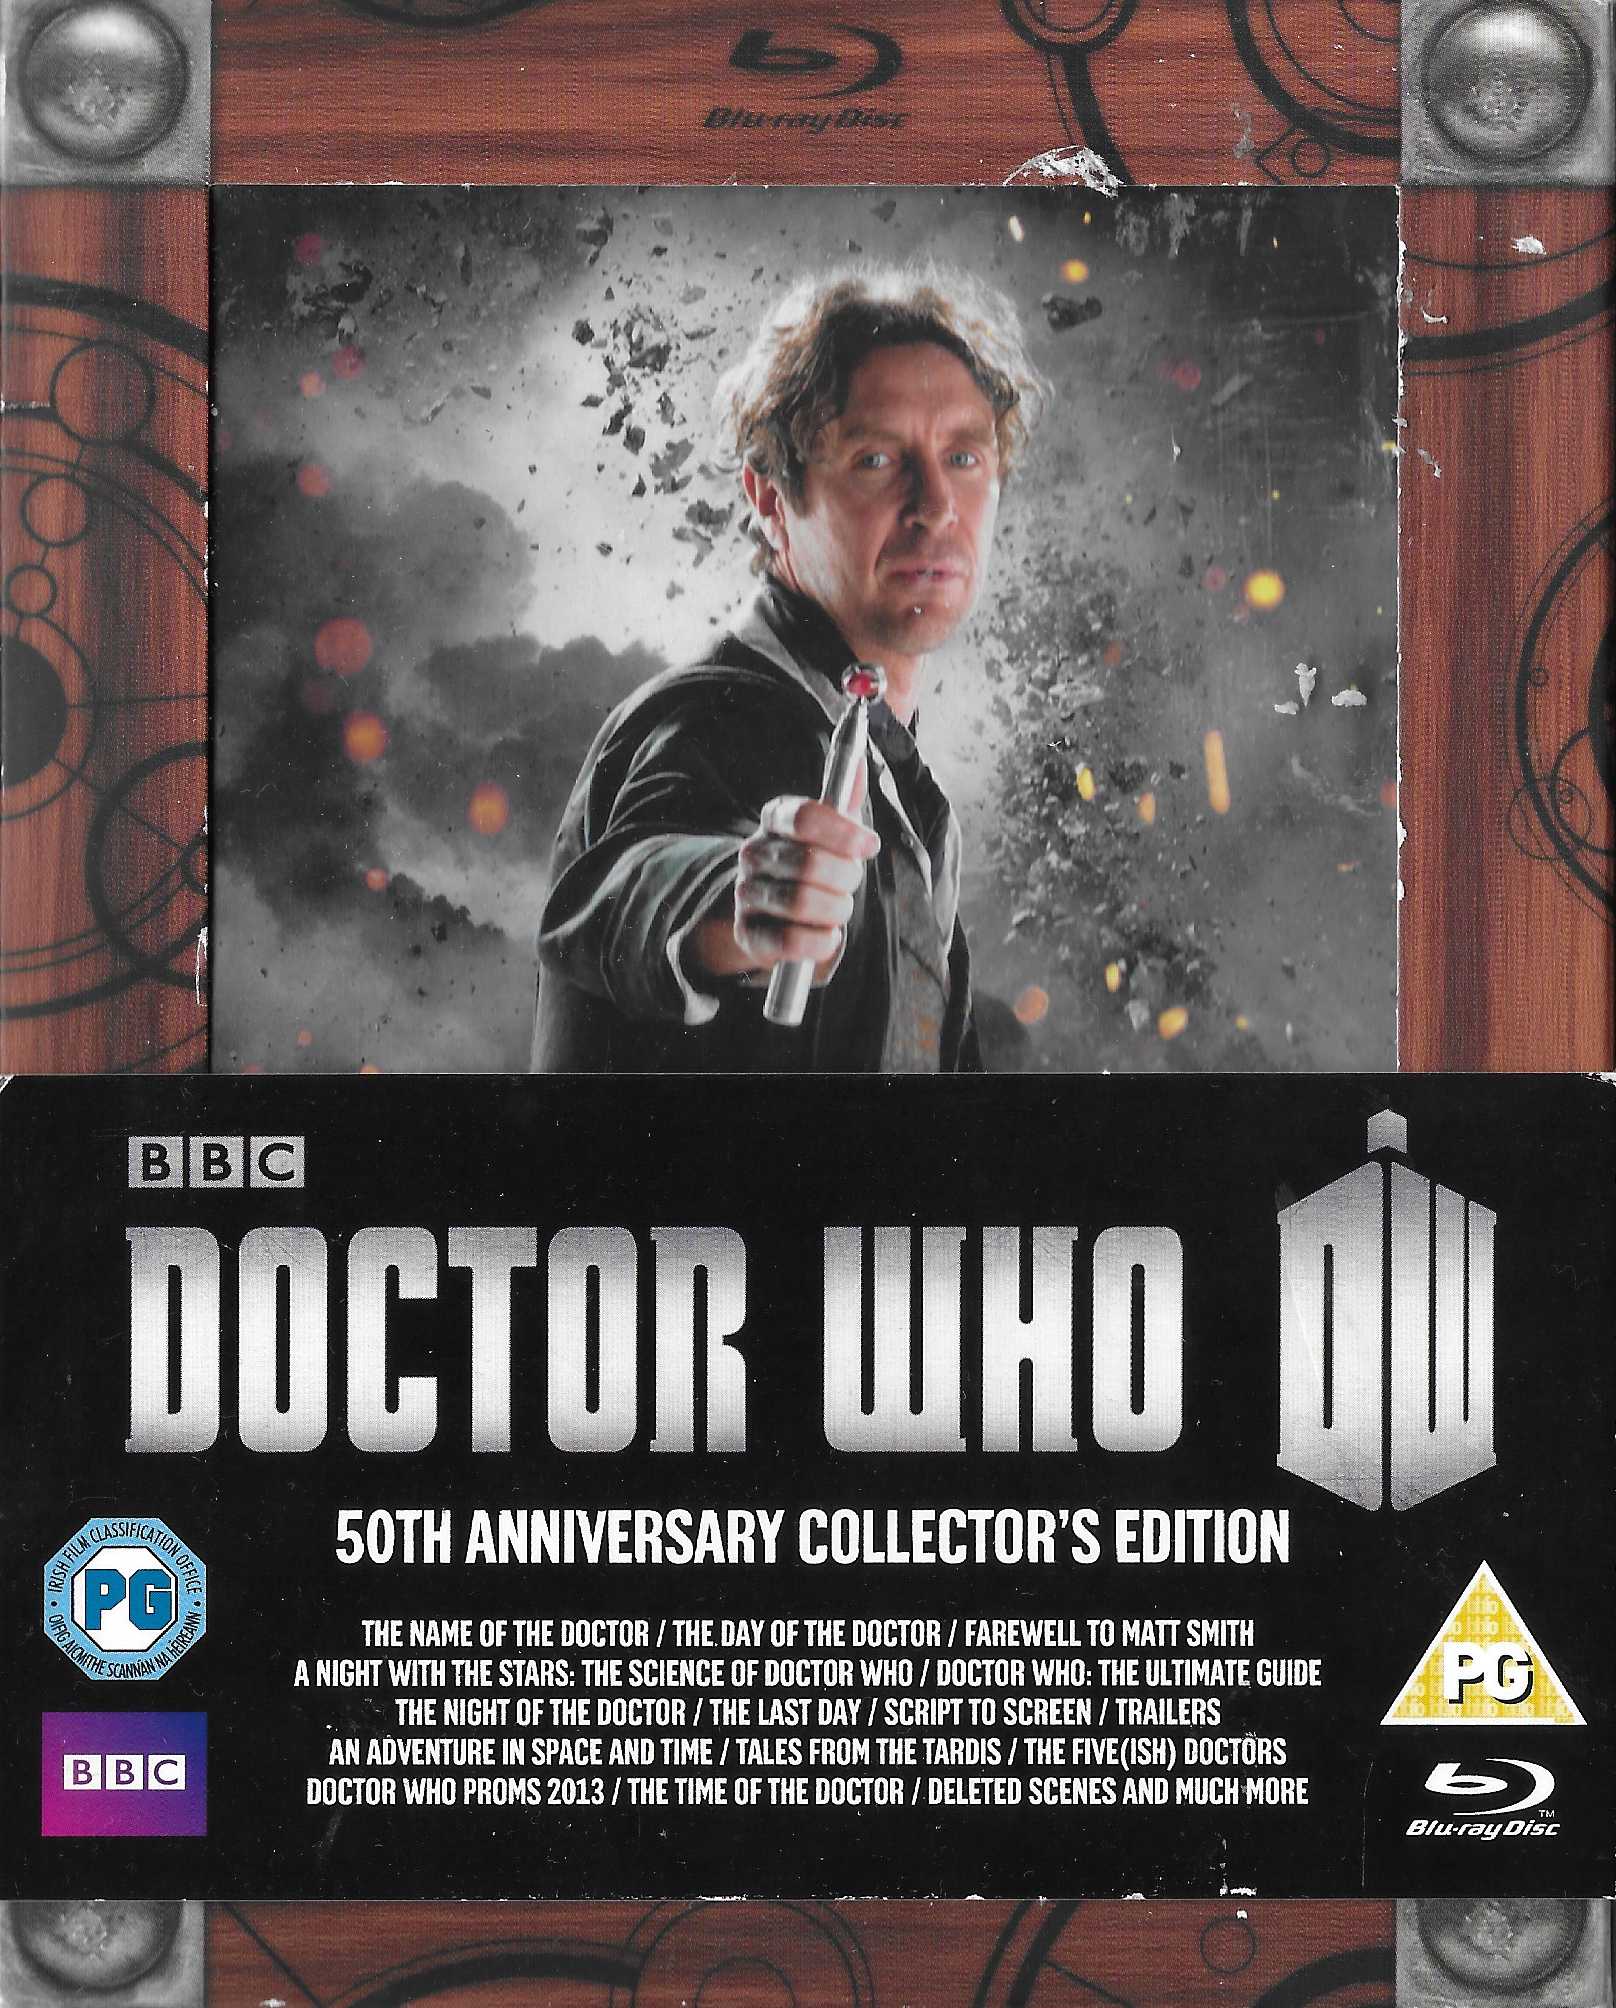 Picture of BBCBD 0271 Doctor Who - 50th anniversary collector\'s edition by artist Steven Moffat / Mark Gatiss from the BBC records and Tapes library